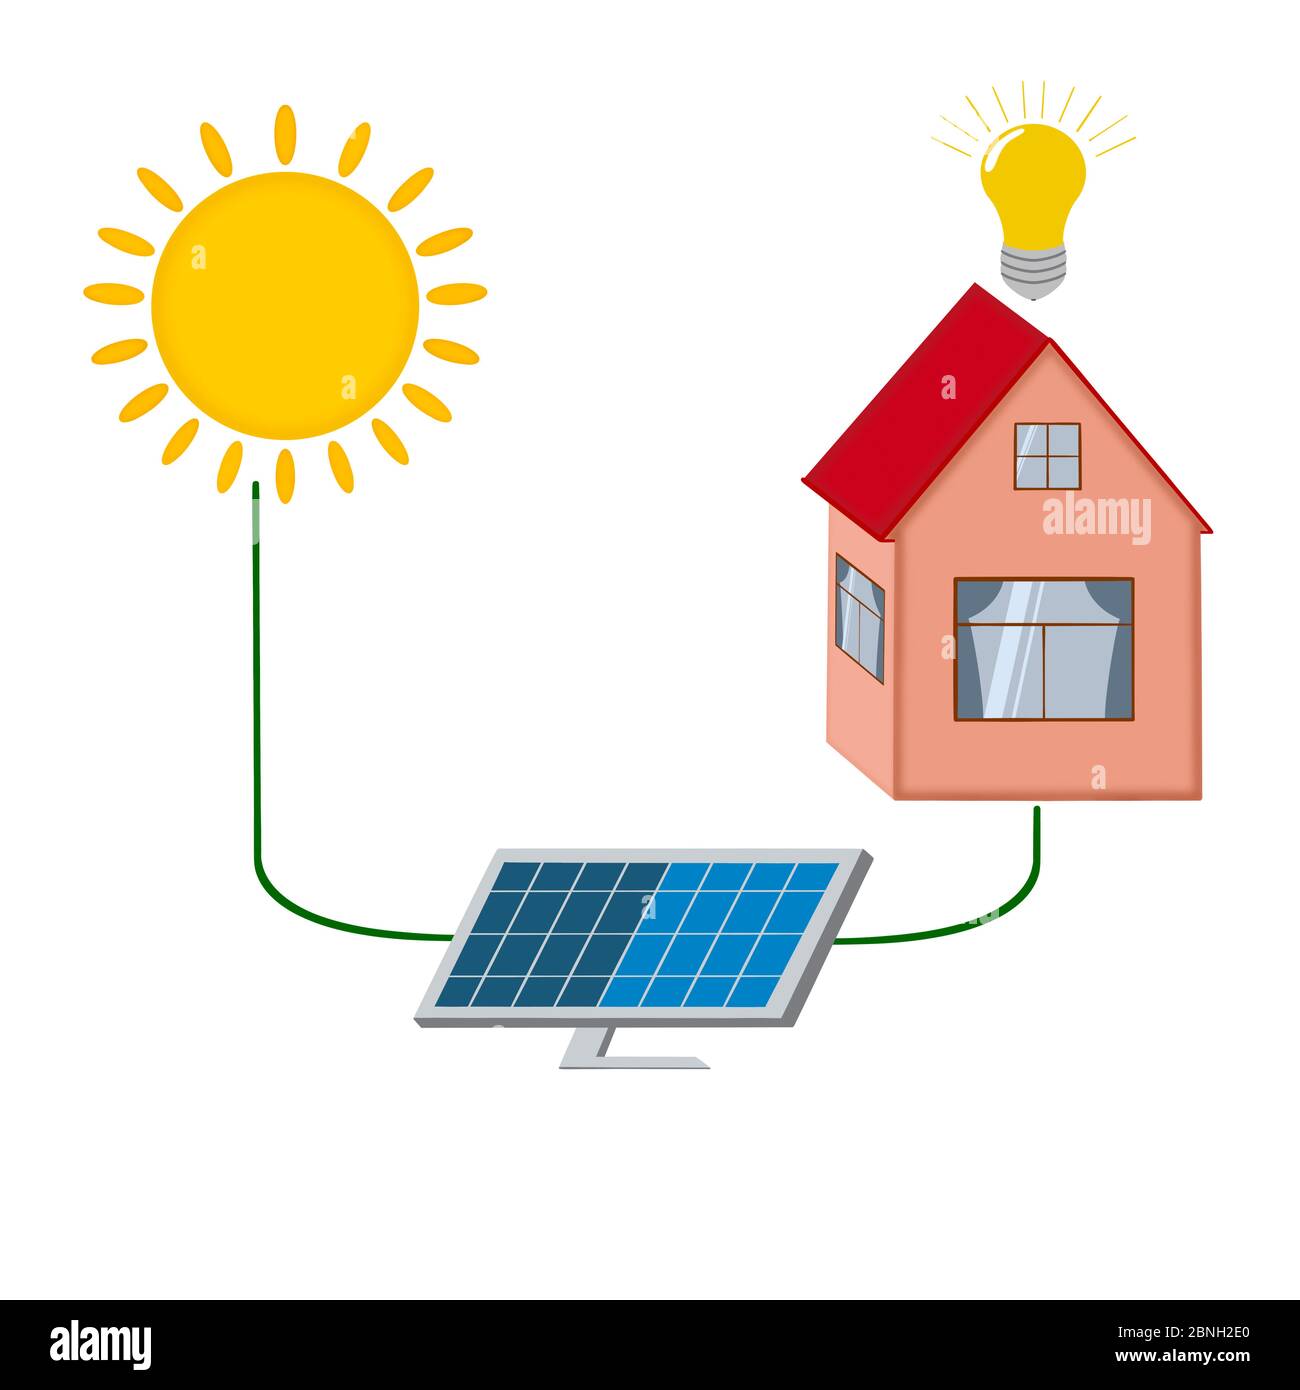 Home solar energy system concept. Diagram with sun, photovoltaic cell panel and house. Flat style illustration. Stock Photo